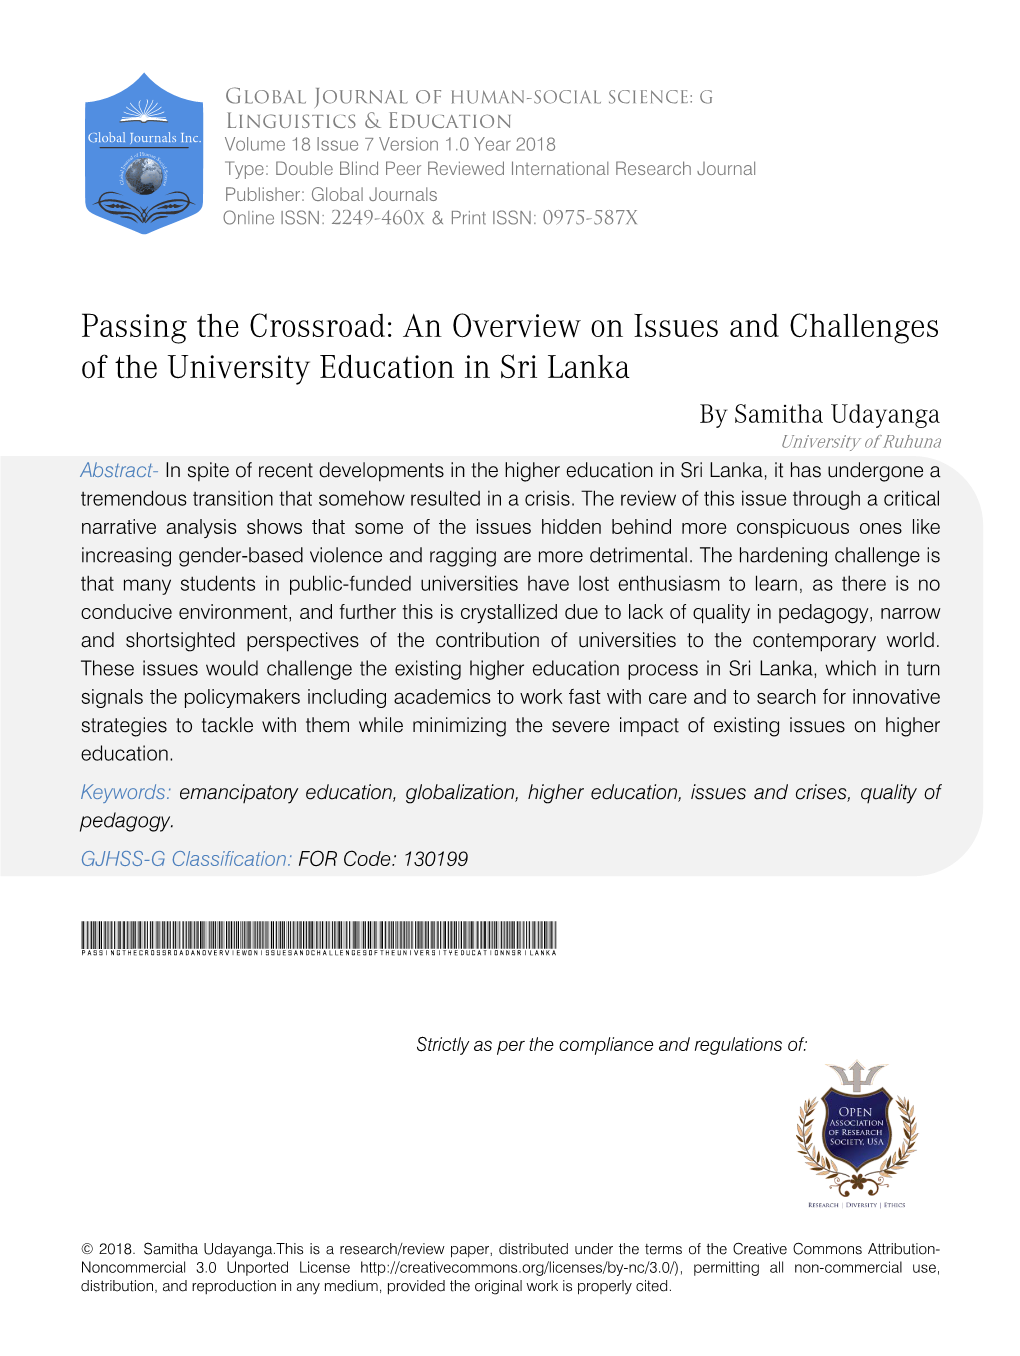 Passing the Crossroad: an Overview on Issues and Challenges of the University Education in Sri Lanka